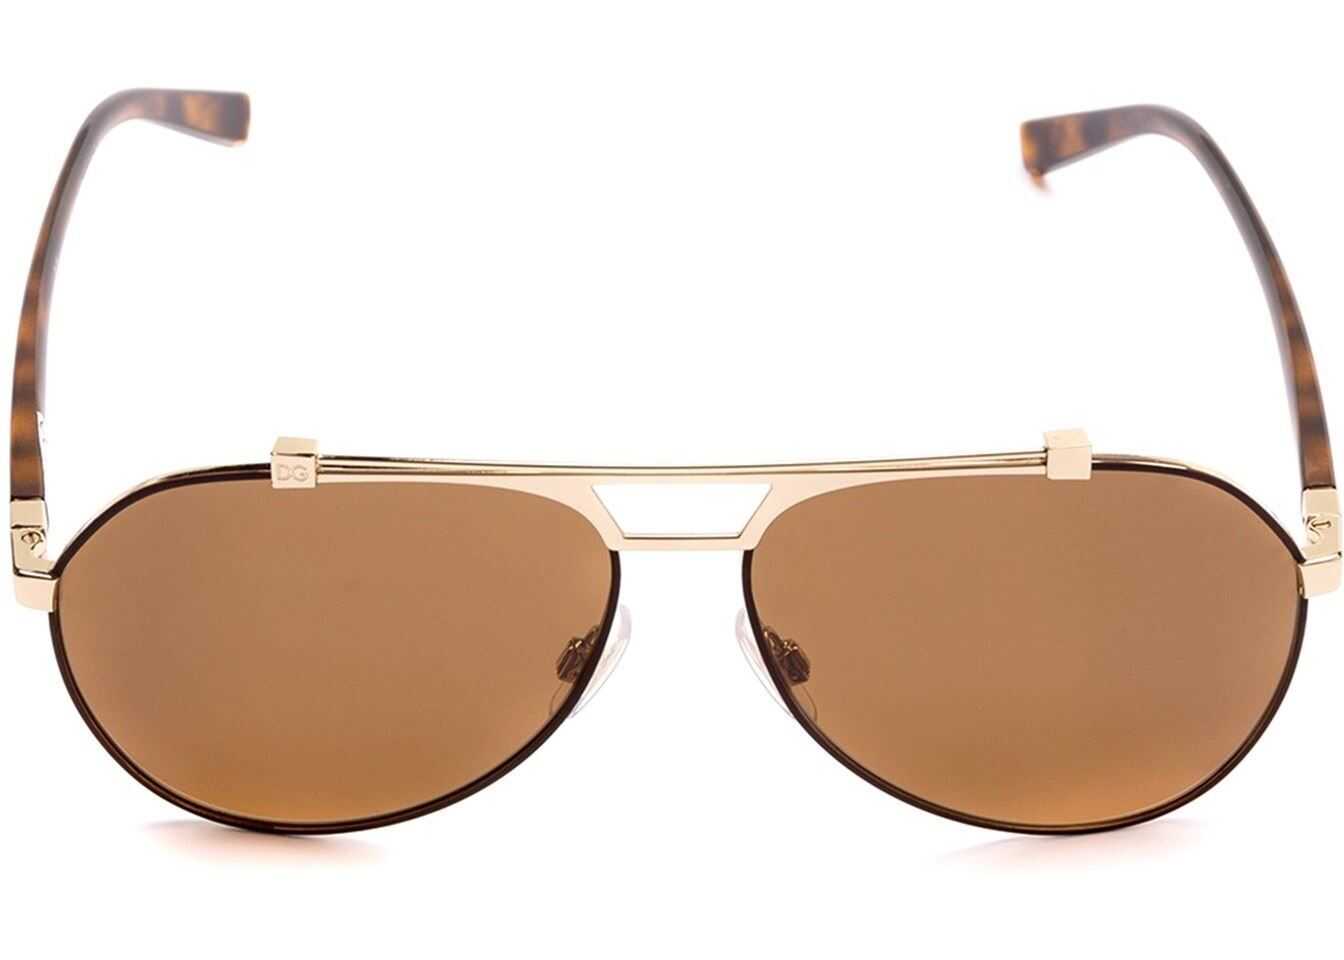 Dolce & Gabbana Aviator Sunglasses With Tortoise Temples Brown